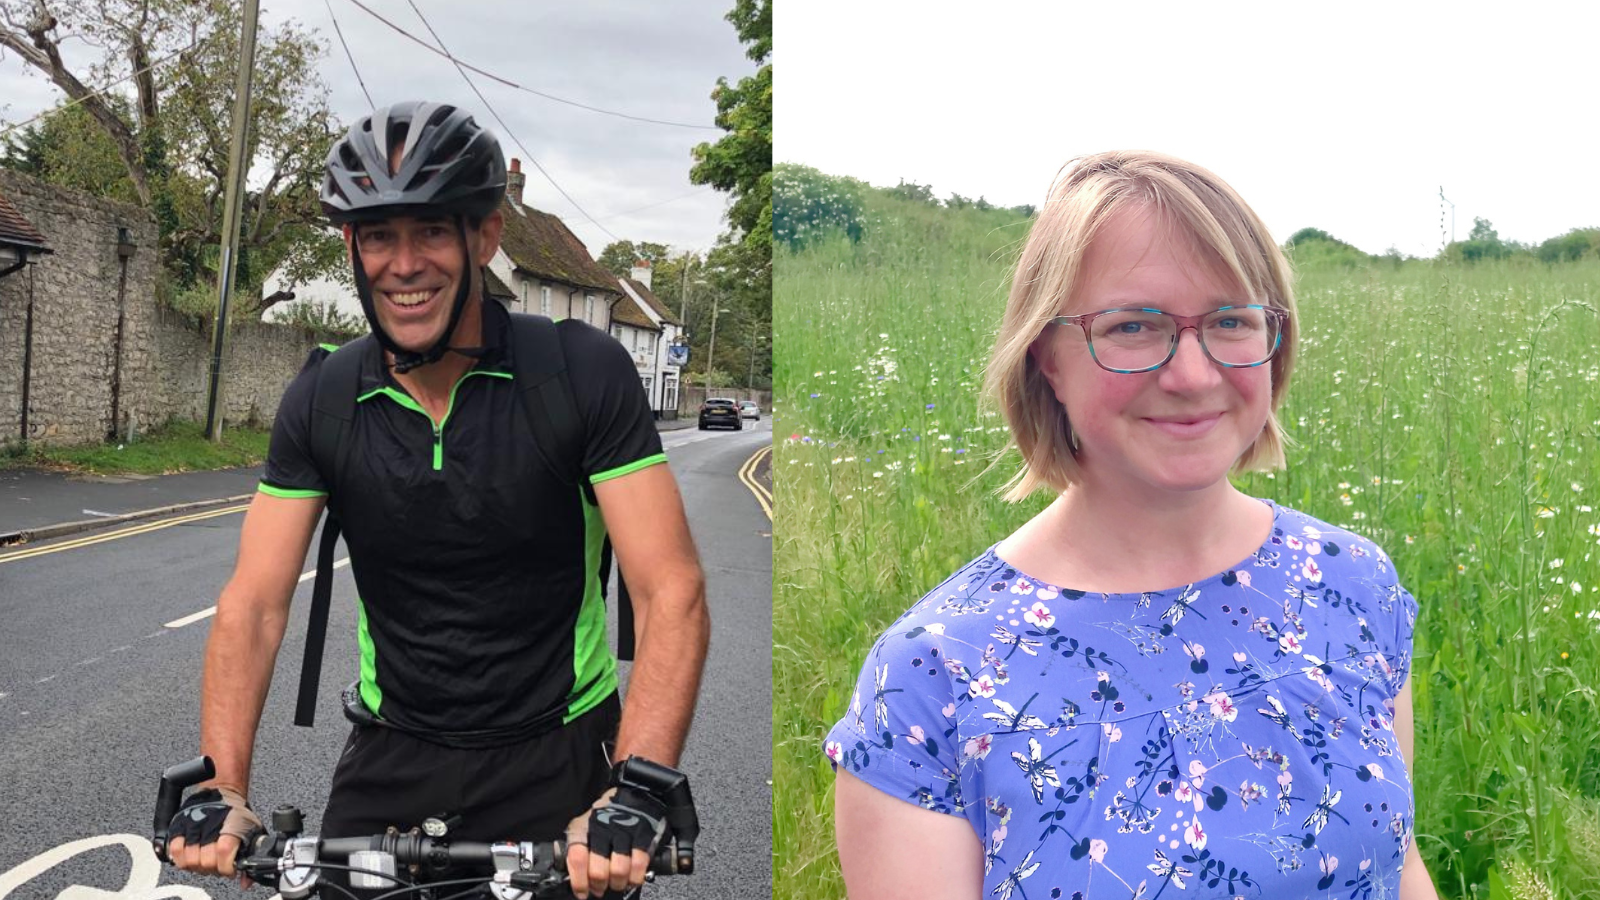 Cllr Eric de la Harpe on a bike next to a separate image of Cllr Katherine Foxhal in front of a field.